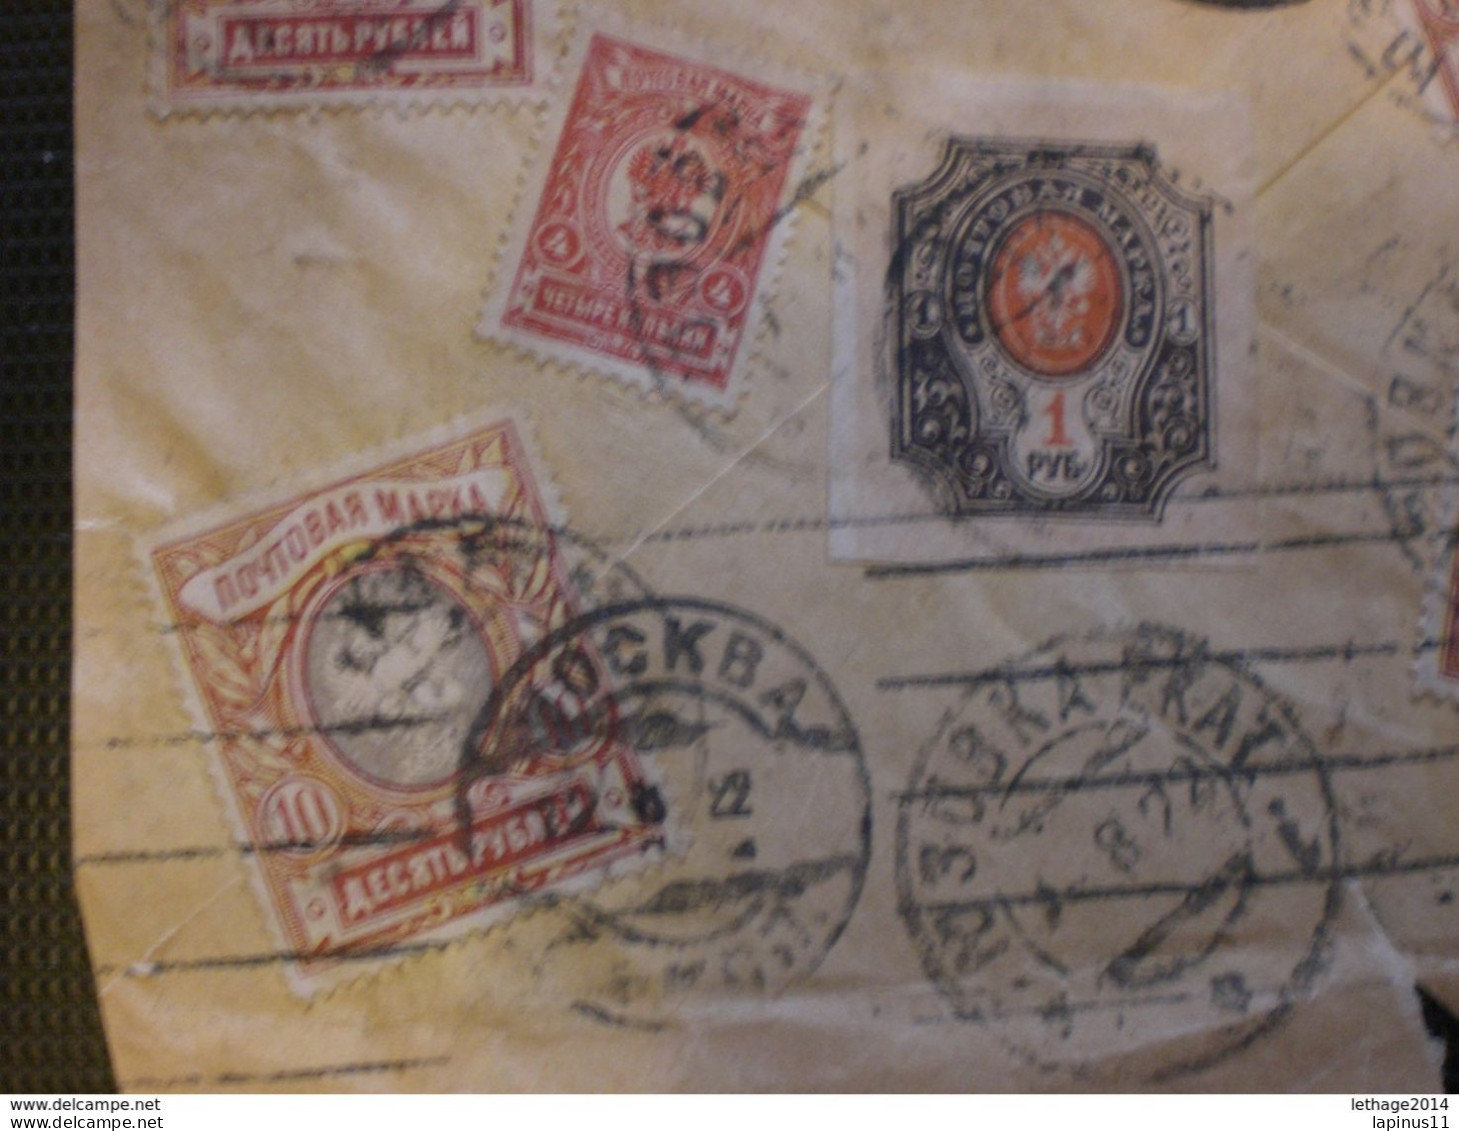 RUSSIA RUSSIE РОССИЯ STAMPS COVER 1922 REGISTER MAIL RUSSIA TO ITALY OVER STAMPS FULL RRR RIF.TAGG. (127) - Storia Postale